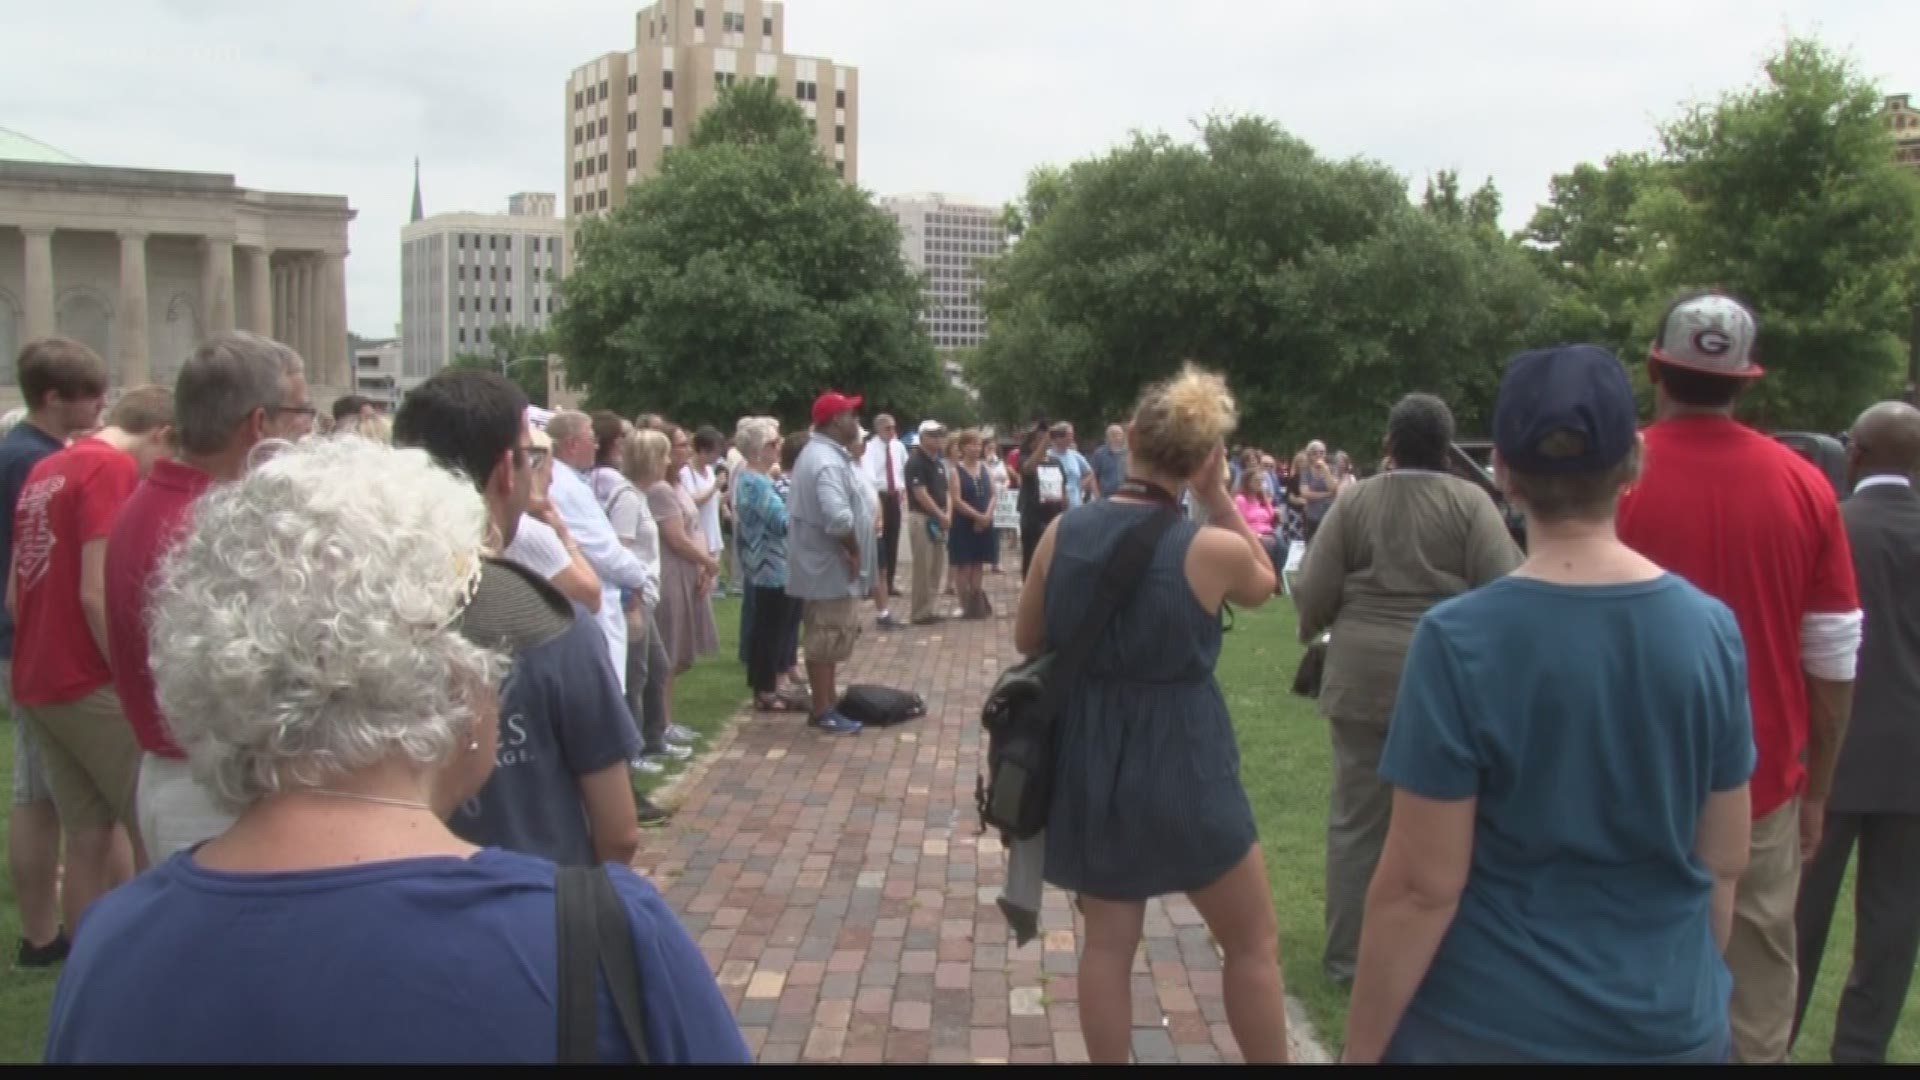 Abortion protesters hold rally about proposed women's health clinic